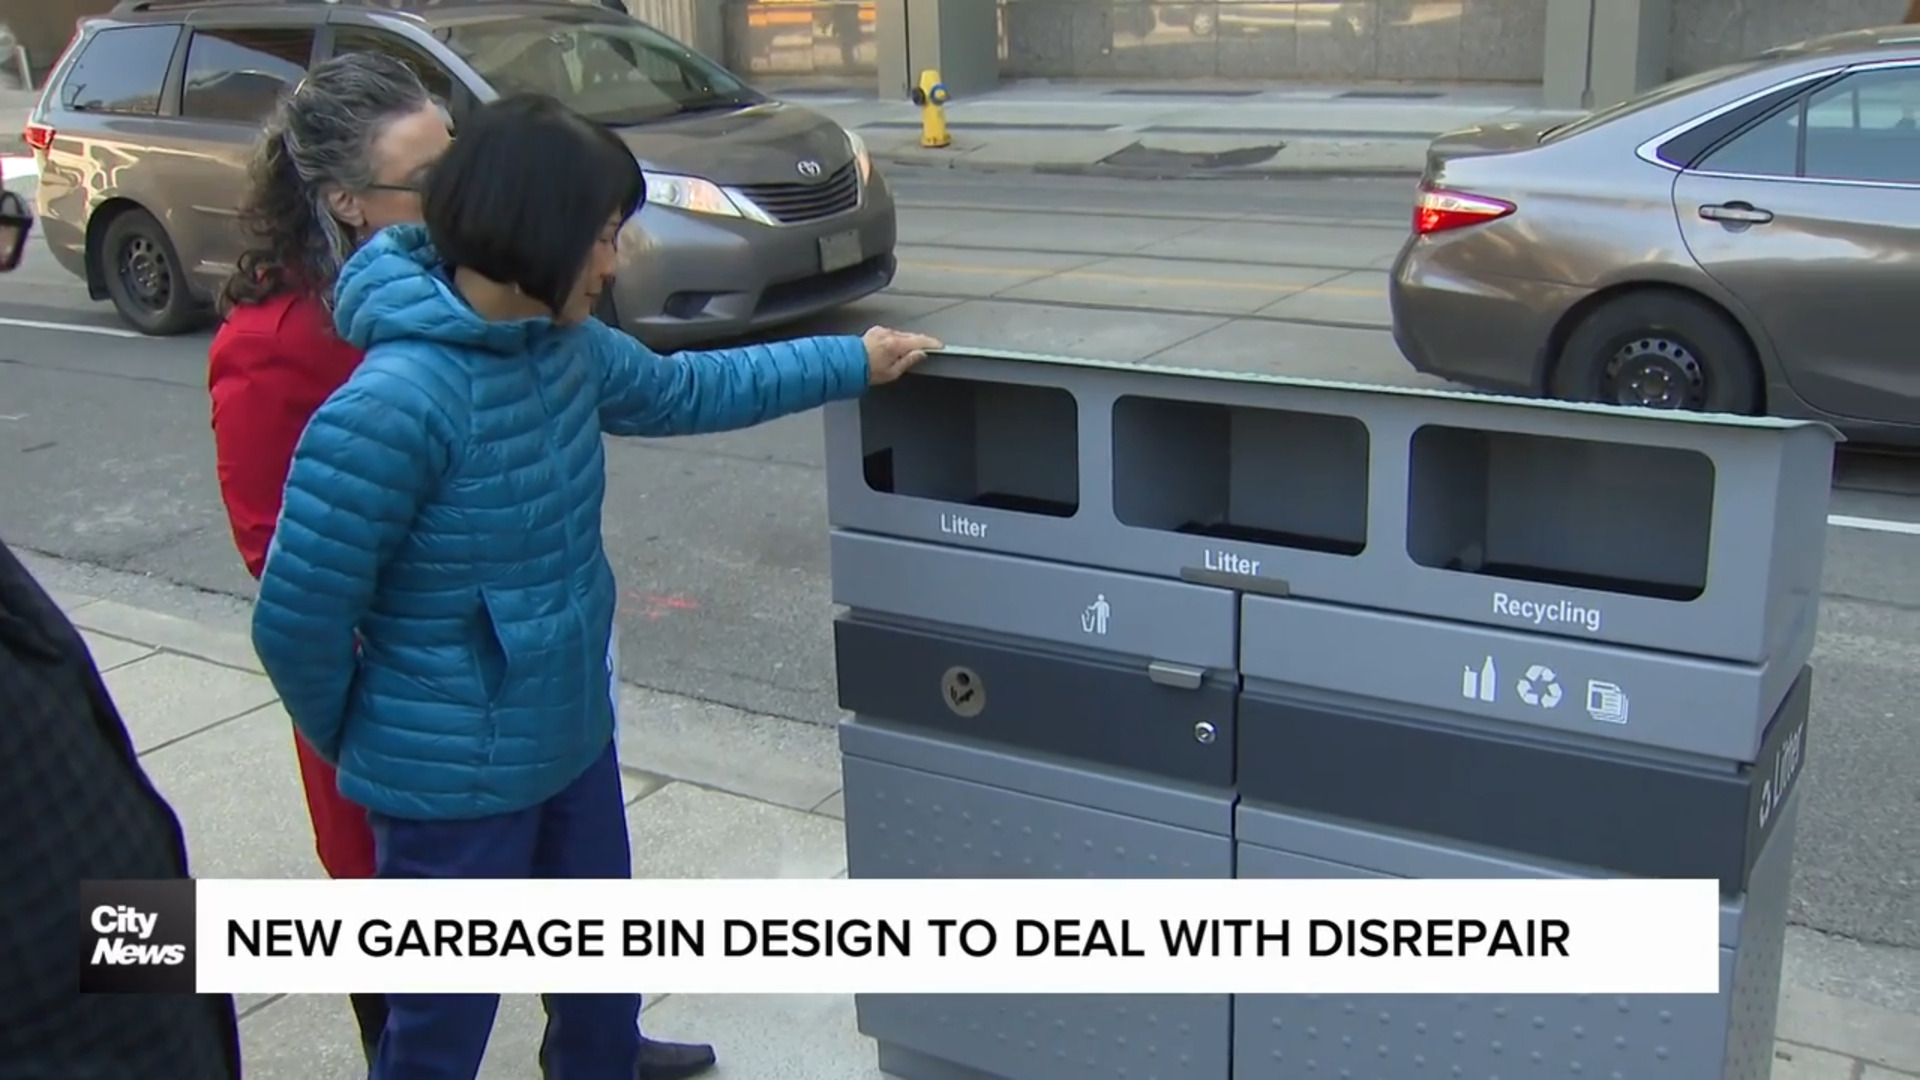 Street litter bins redesigned after years of trash talk and disrepair